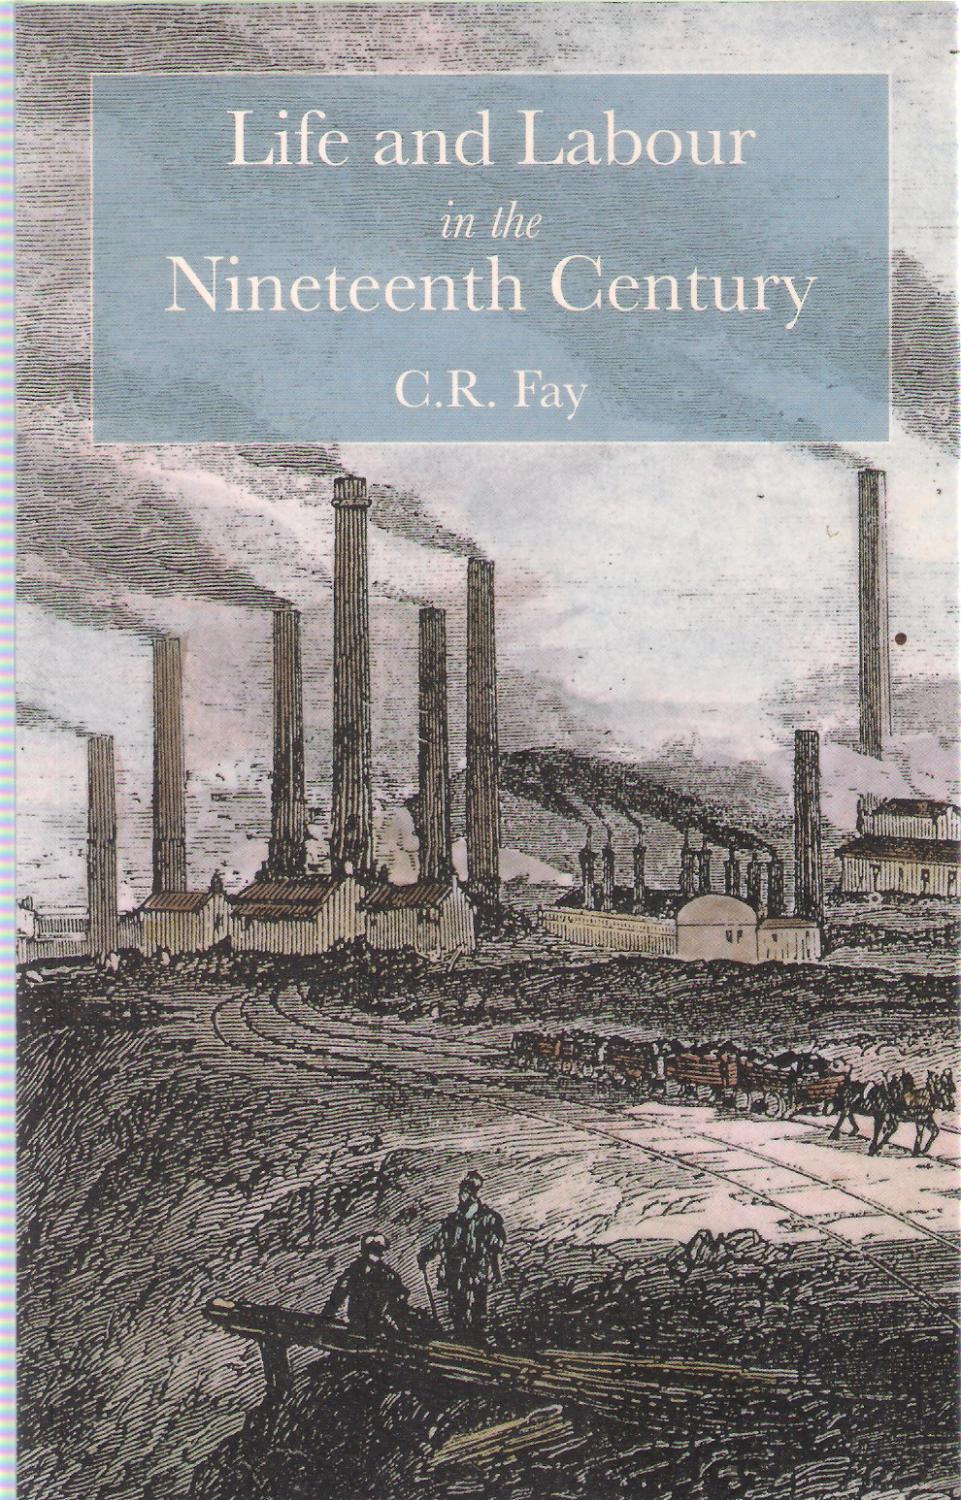 Life and Labour in the Nineteenth Century - C.R. Fay